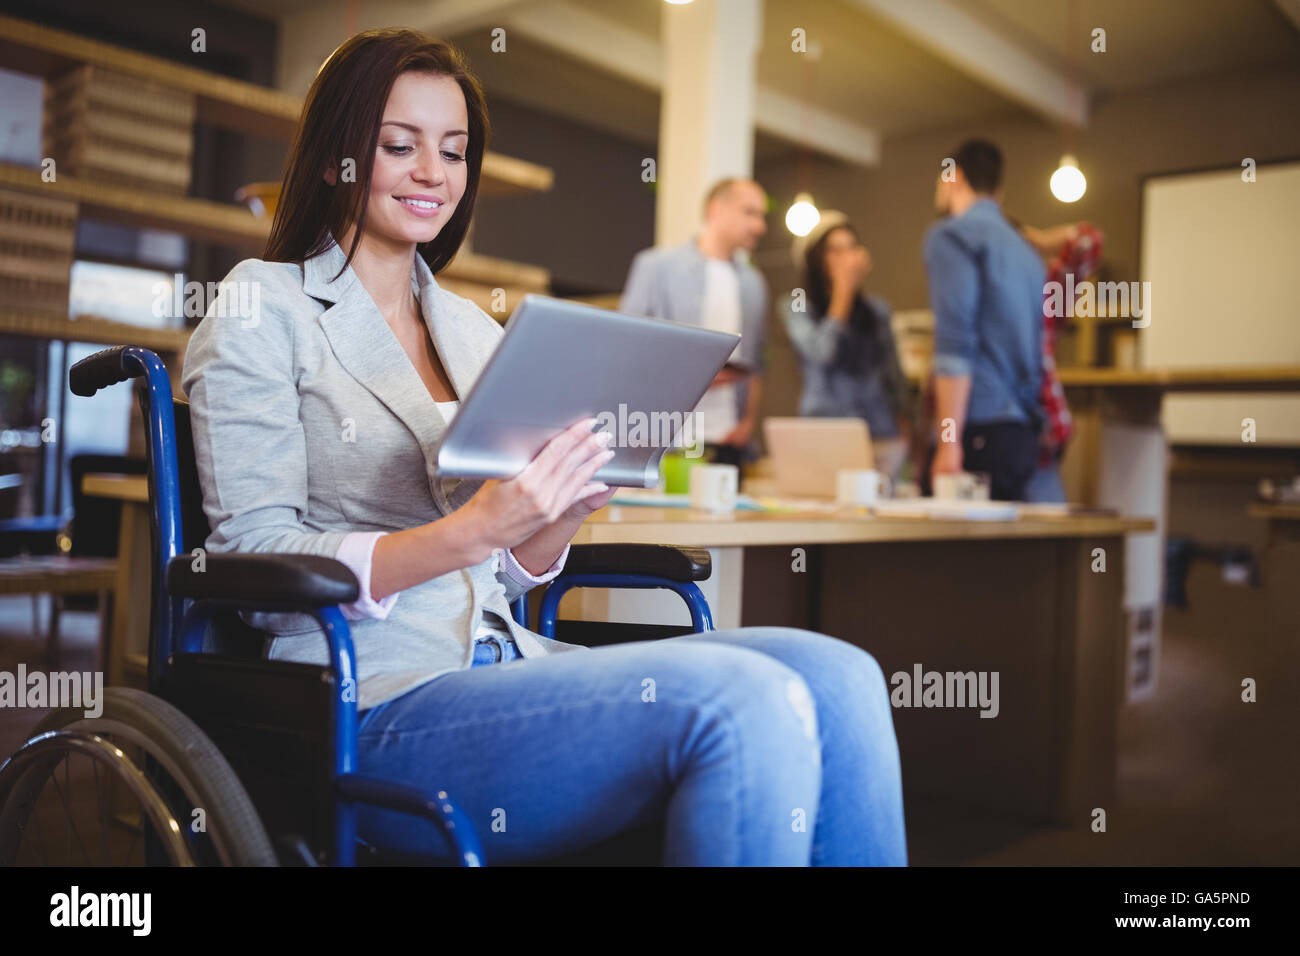 Disabled young businesswoman using digital tablet Stock Photo